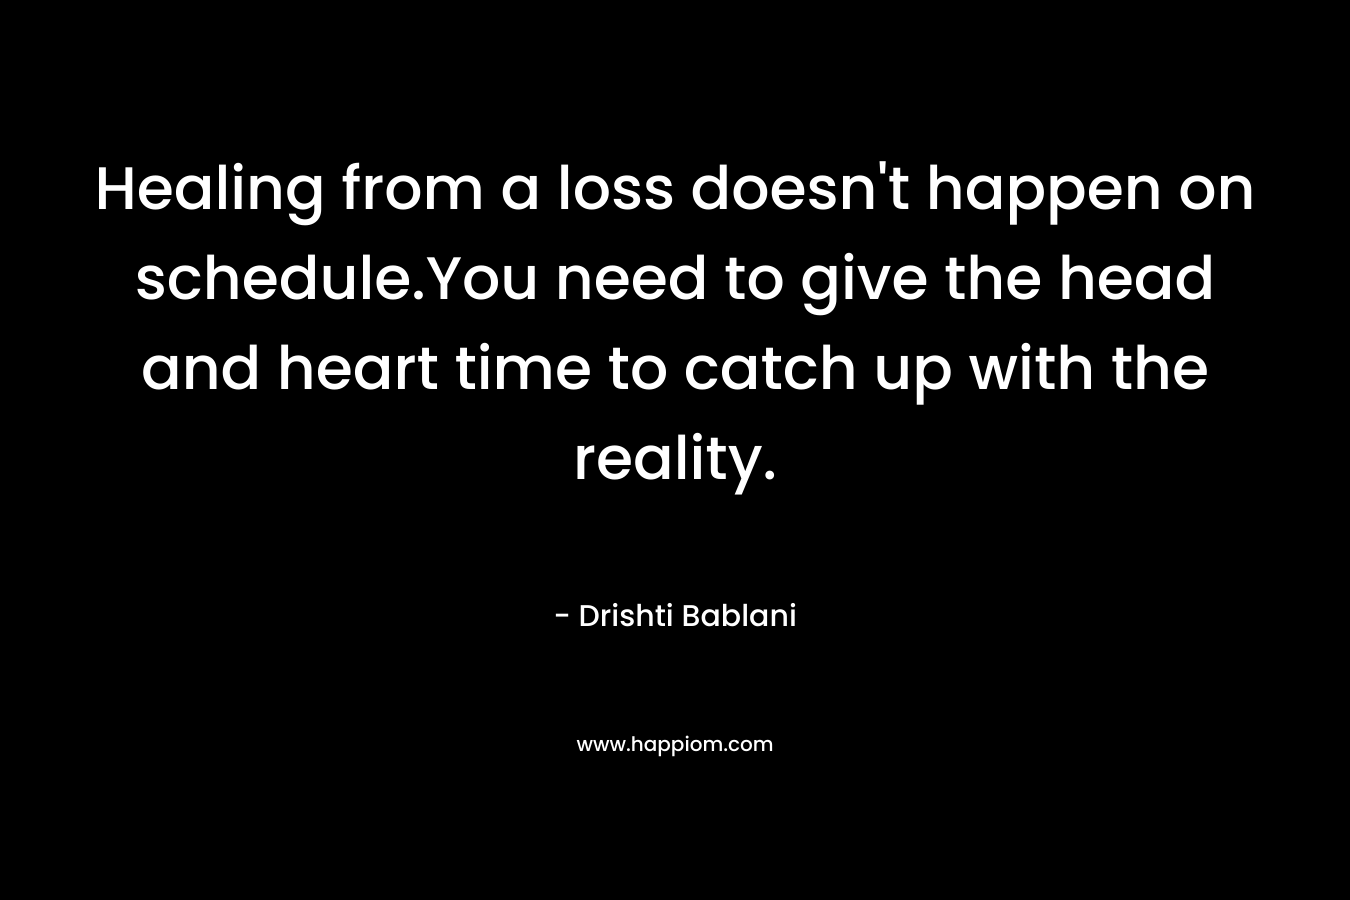 Healing from a loss doesn't happen on schedule.You need to give the head and heart time to catch up with the reality.